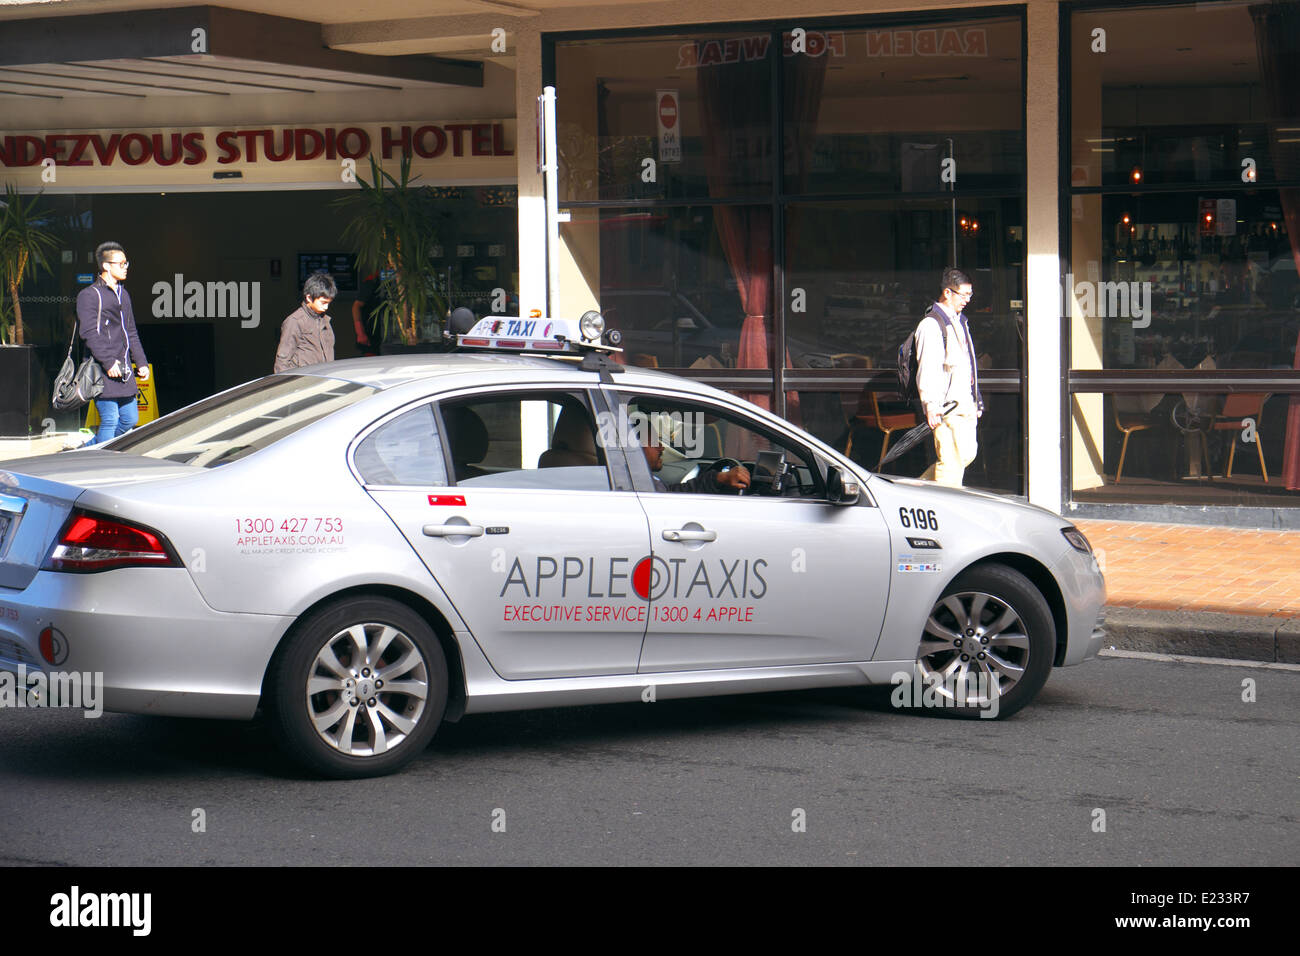 Ford Car taxi a chippendale, Sydney, Australia Foto Stock